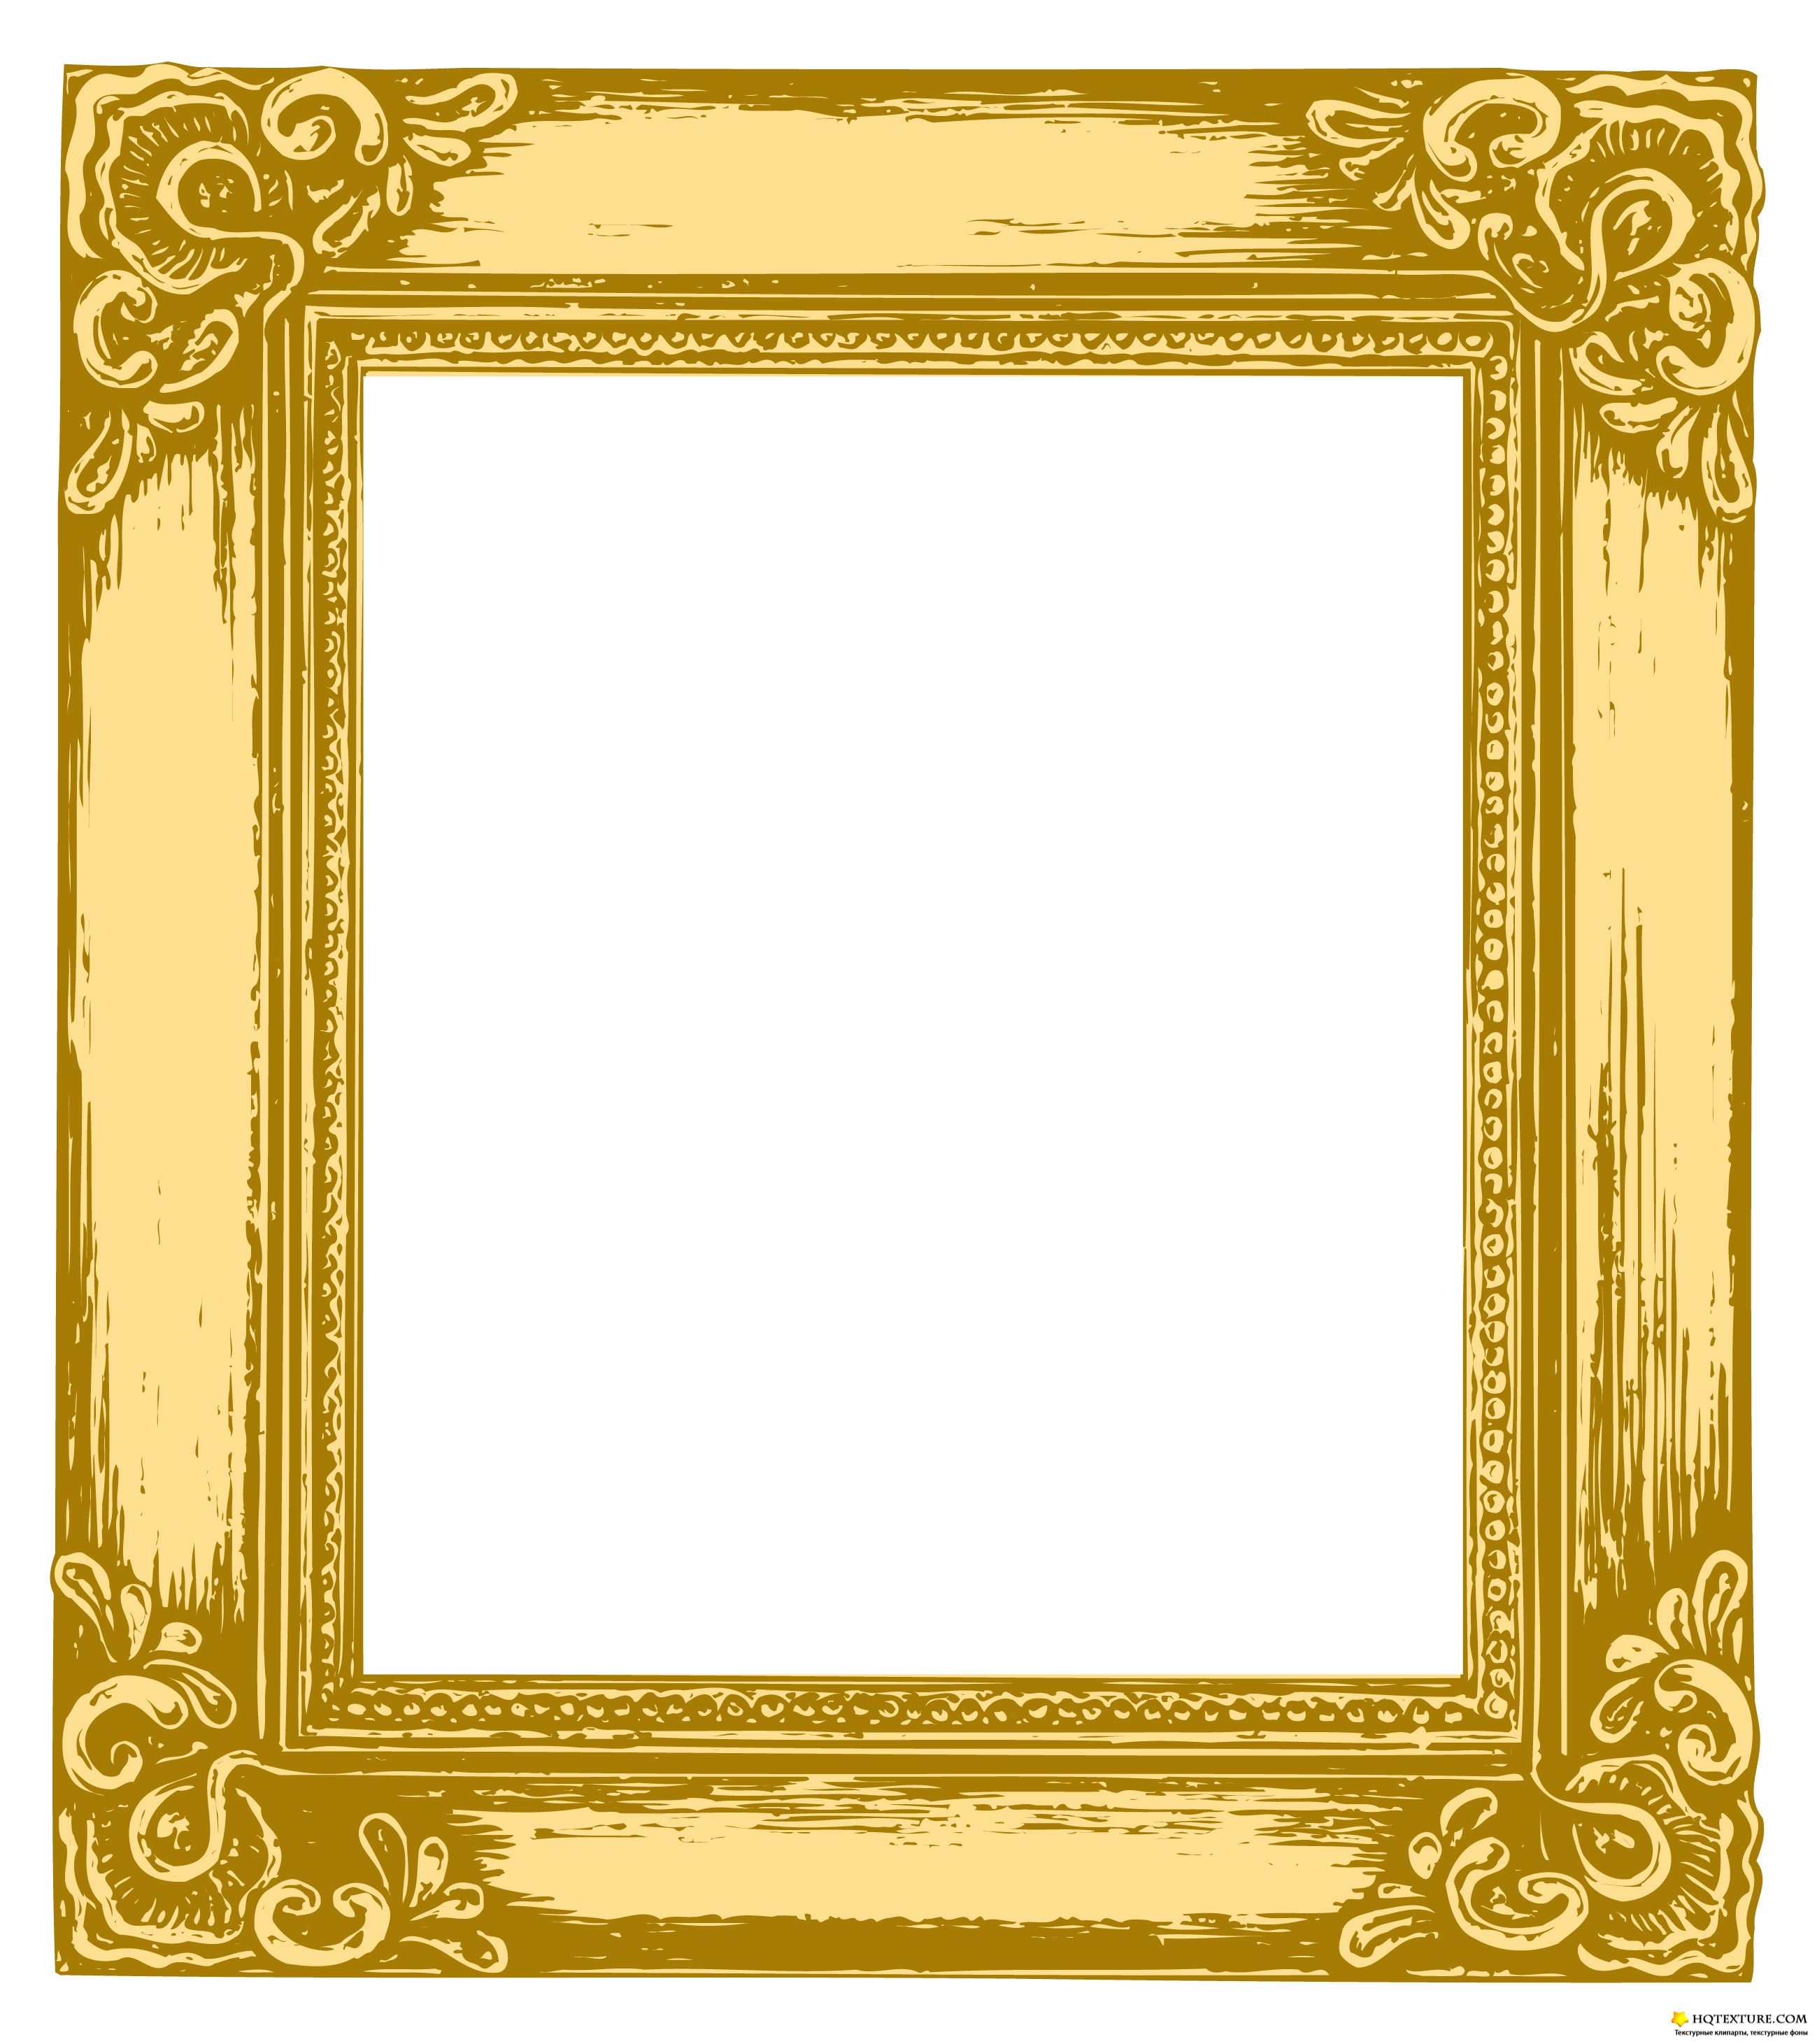 14 Gold Vector Border Images - Gold Borders and Frames, Gold Border